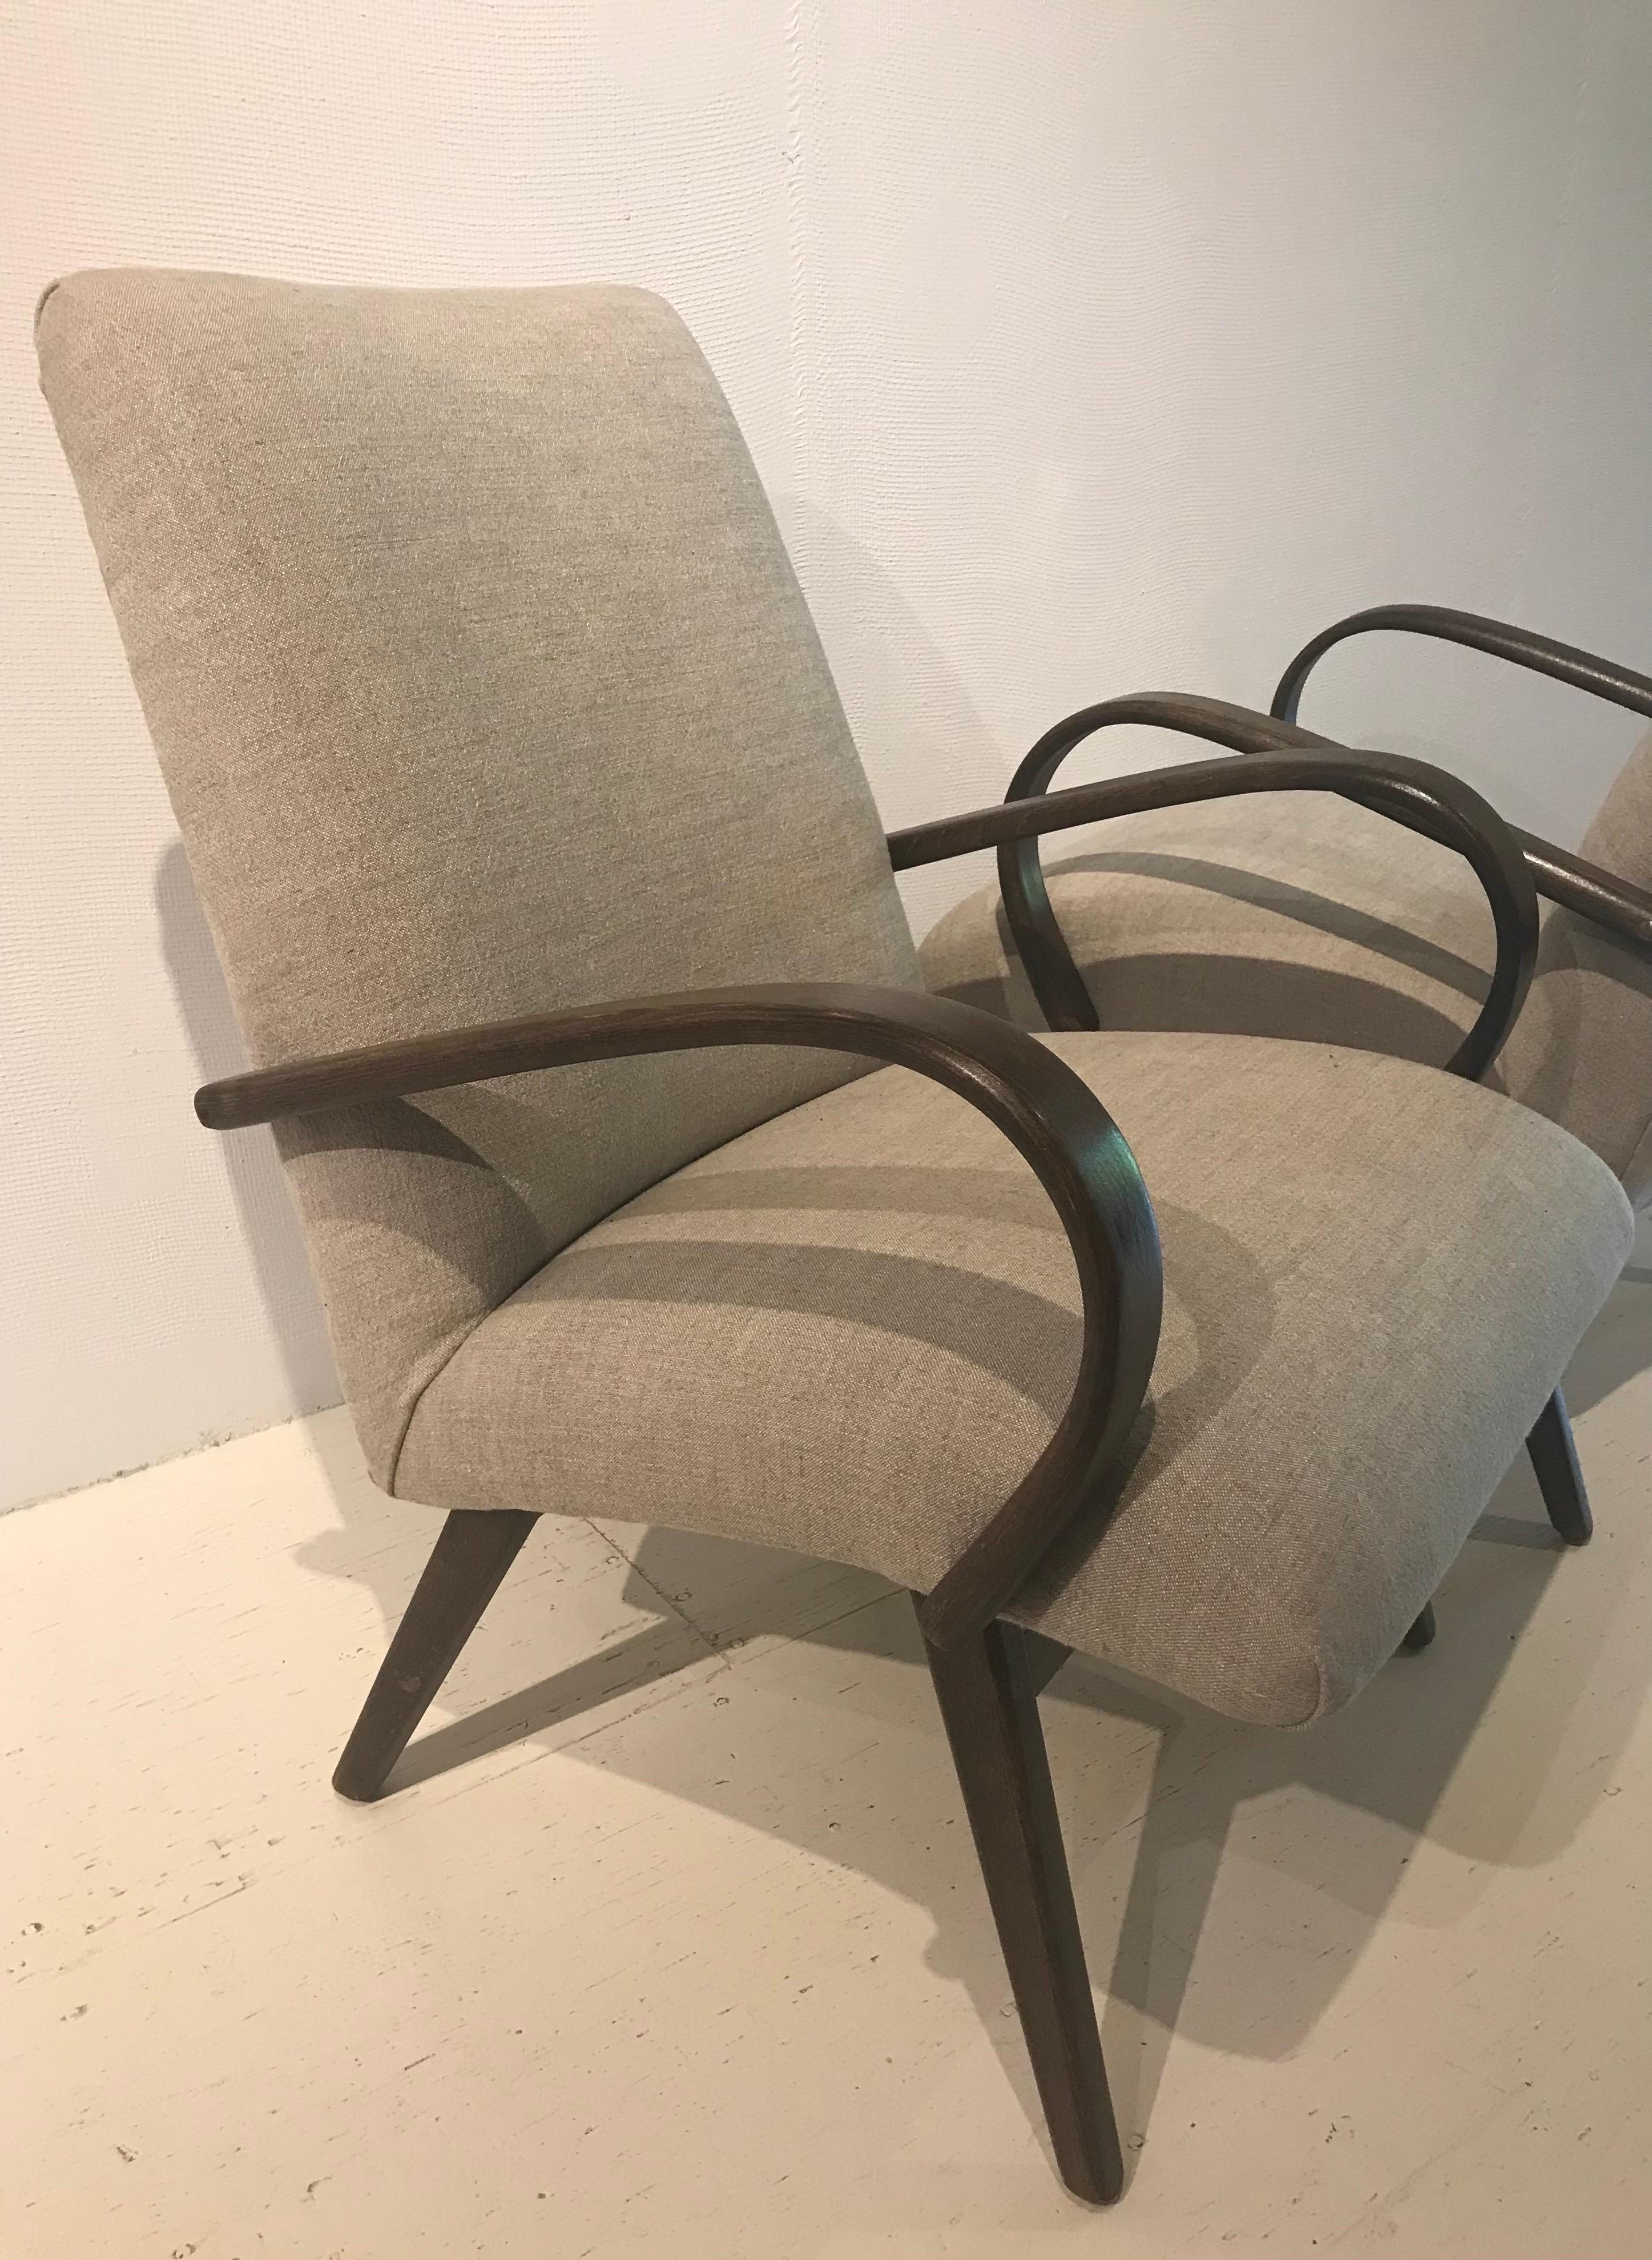 The pair of Danish lounge chairs have an elegant presence without stealing the show. Lovely bent wood arms and sleek body make the pair a grand presentation easily mixed with other periods and in any setting.